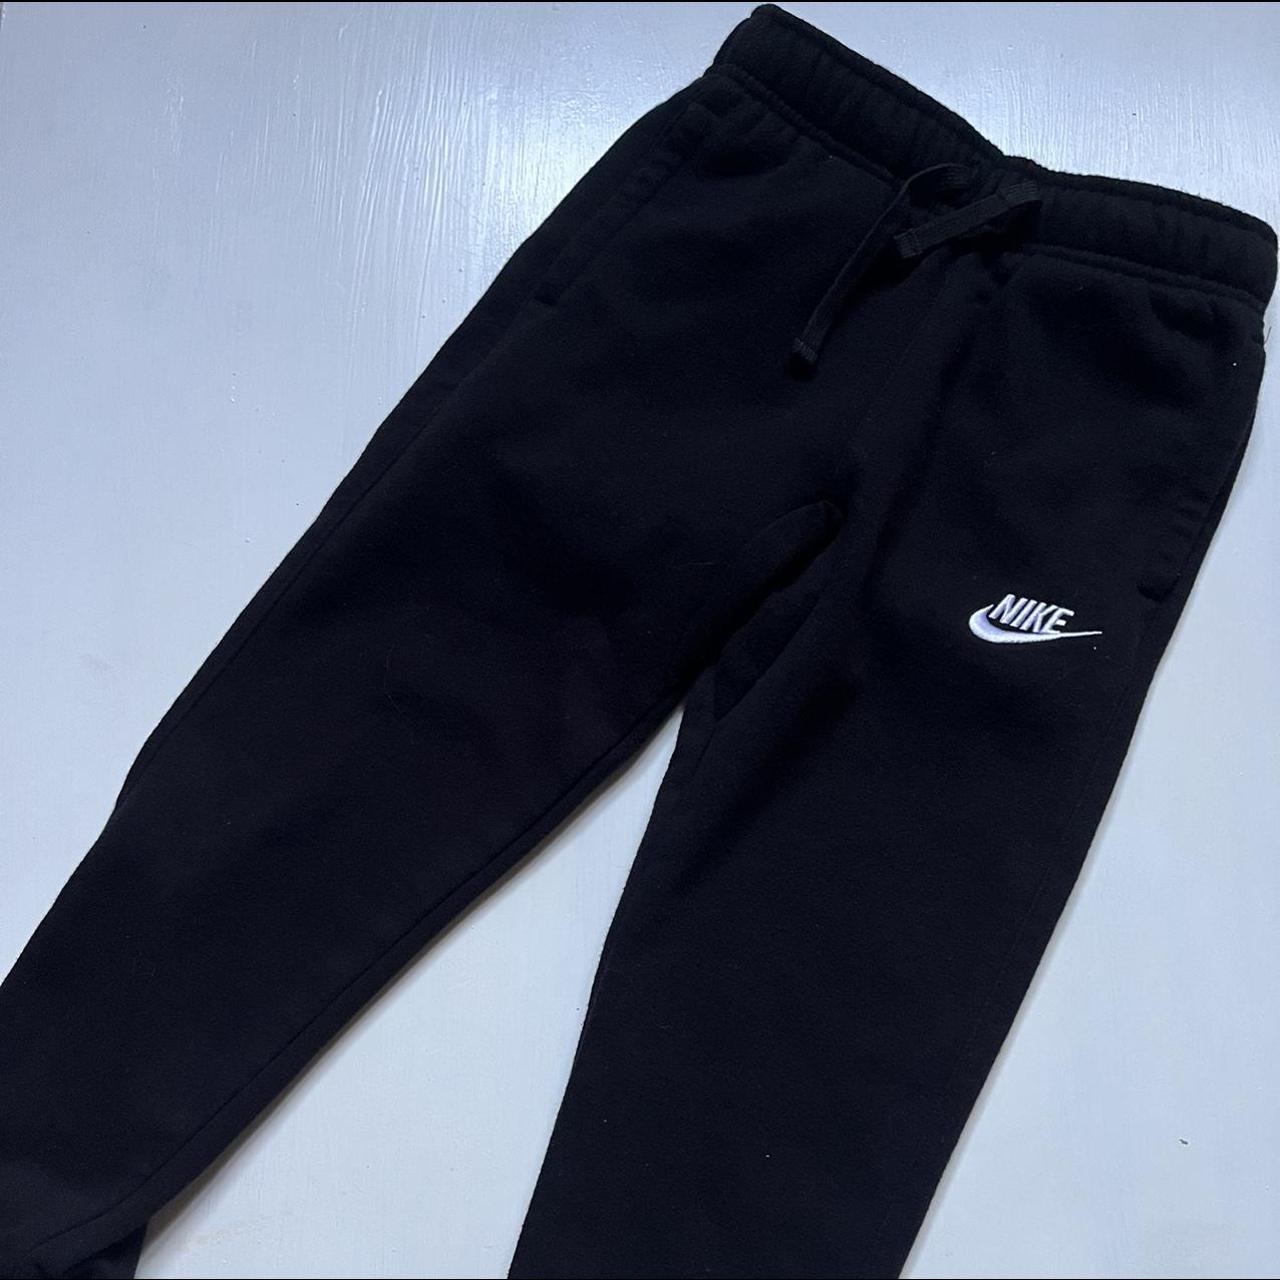 nike sweatpants these are youth size 7 no... - Depop